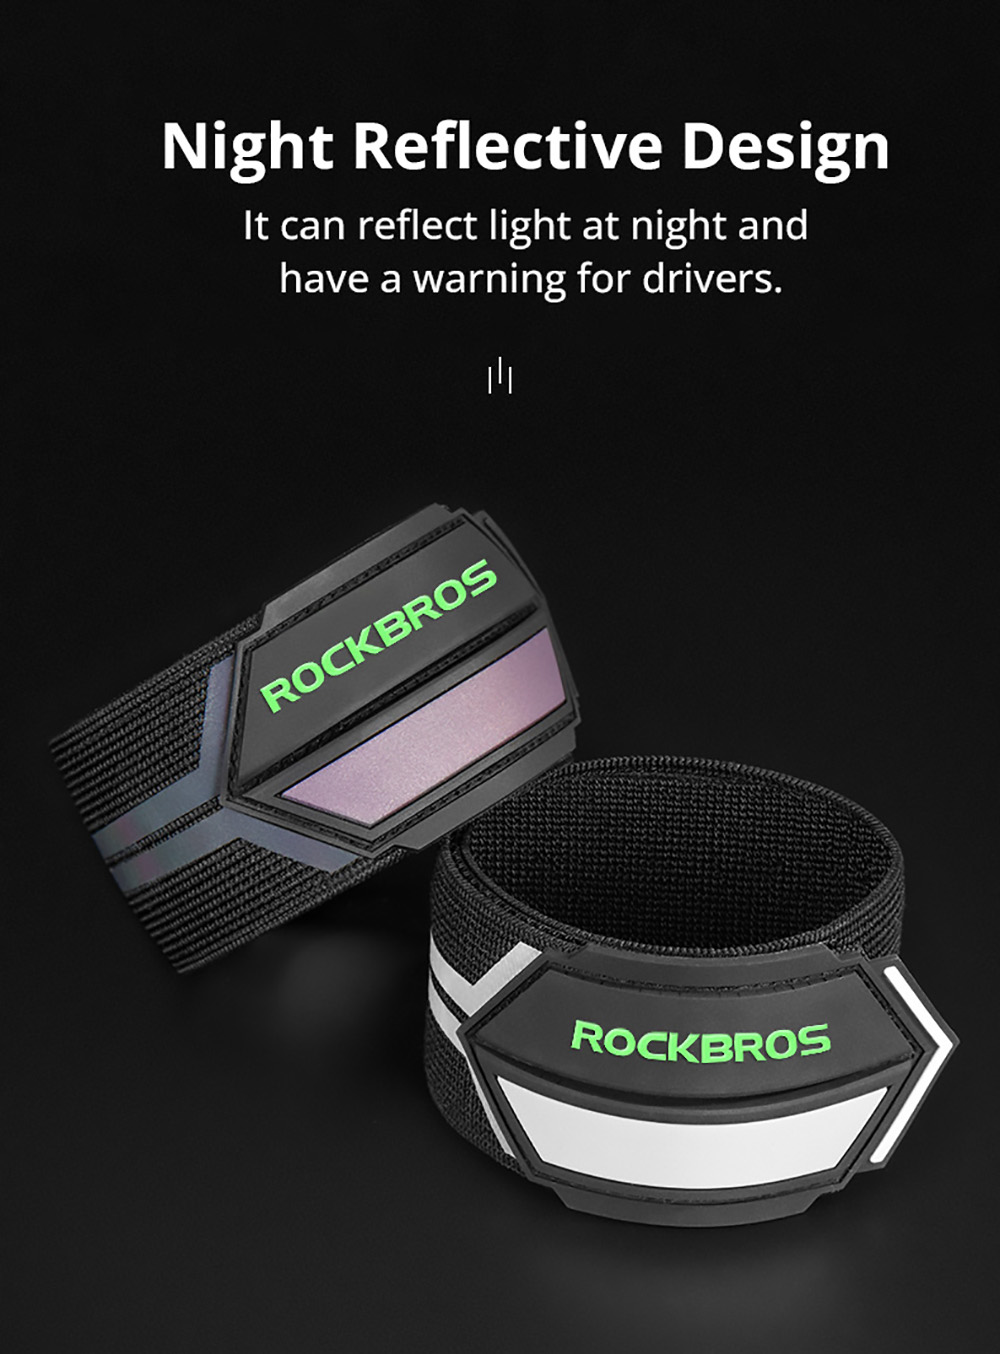 ROCKBROS Reflective Pant Band for Night Running, Cycling, Walking, Adjustable Elastic Safety Gear for Runner - Silver